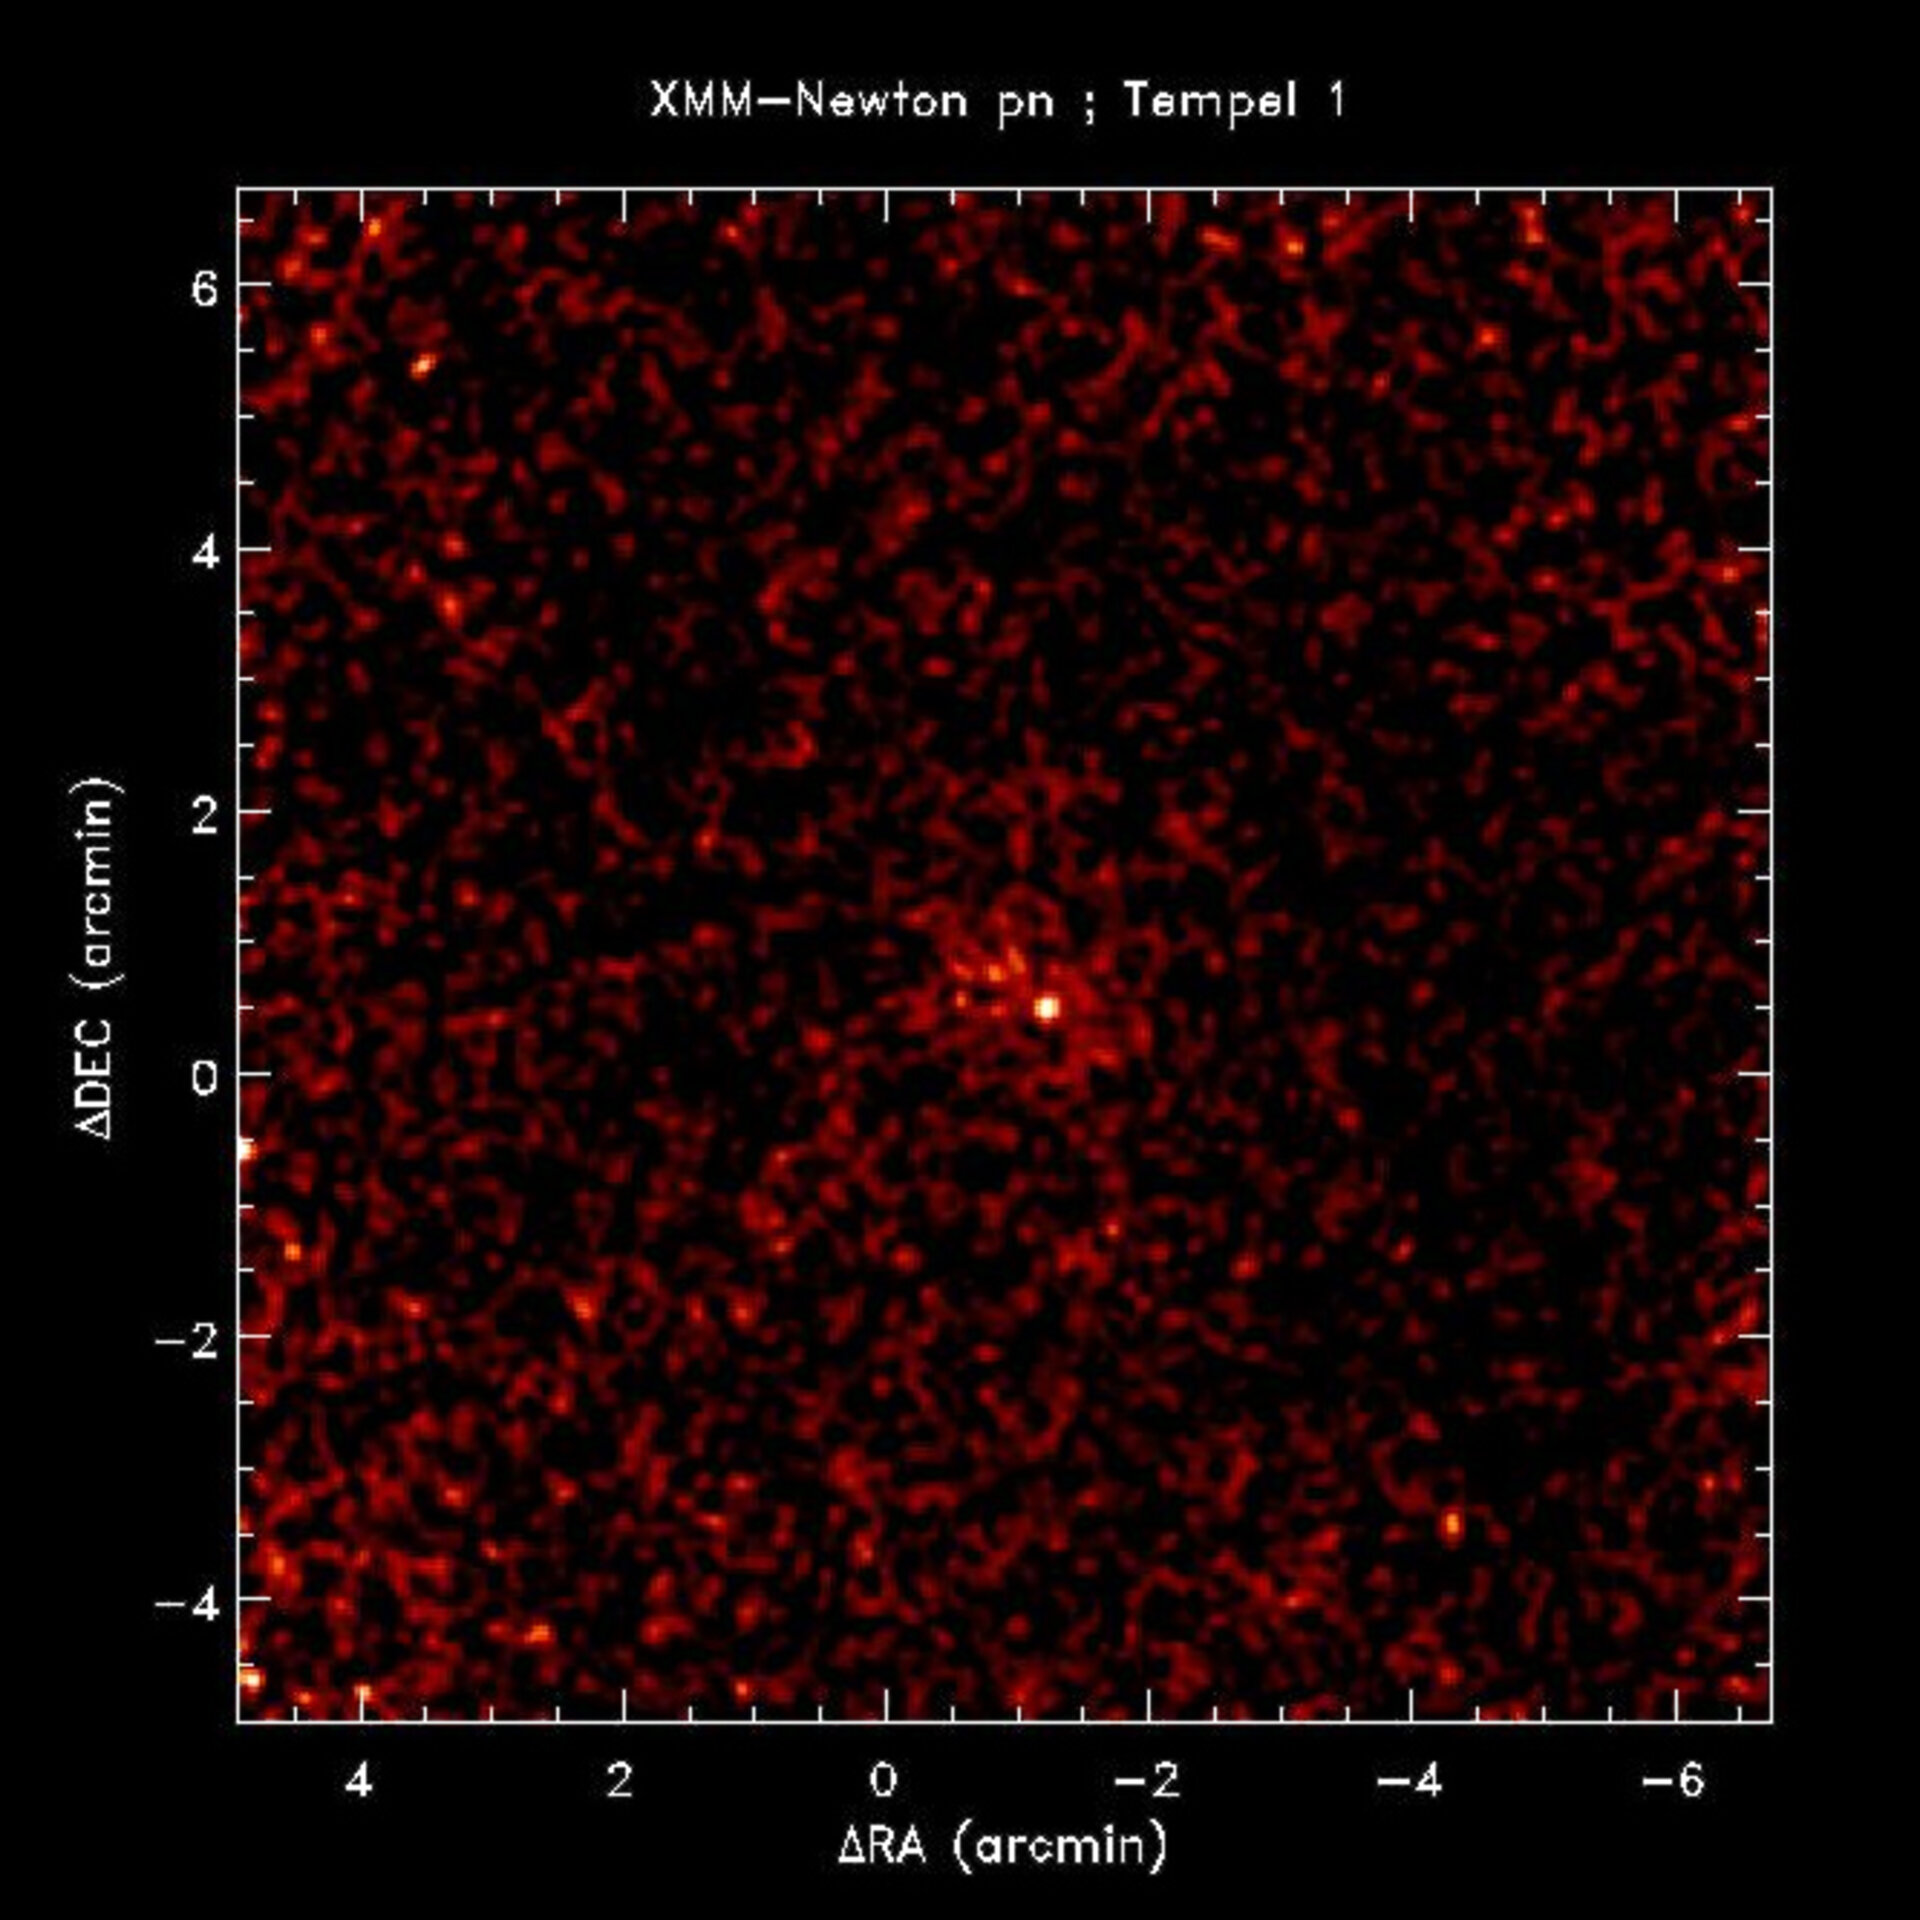 Image recorded by EPIC instrument on XMM-Newton